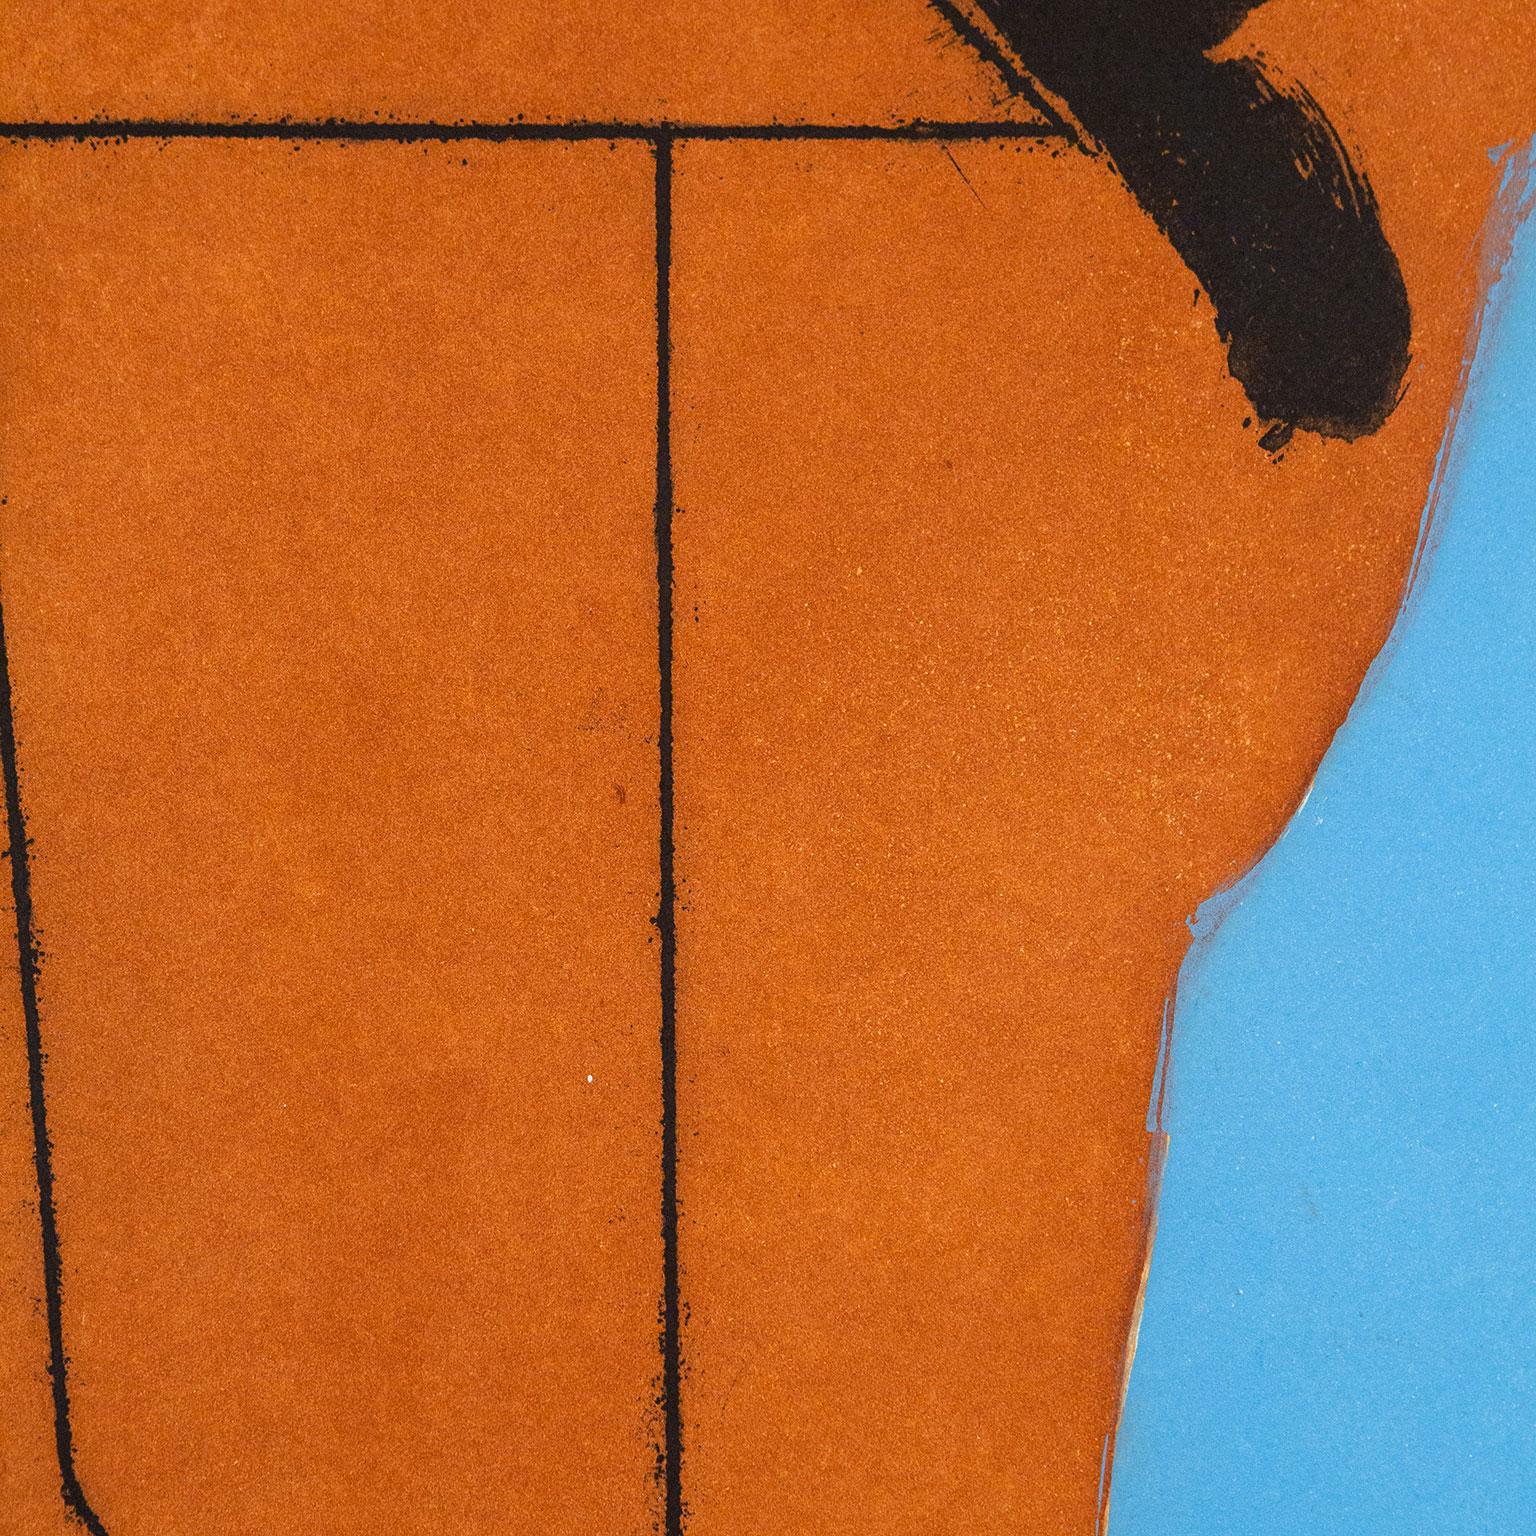 Robert Motherwell (1915-1991), alongside Jackson Pollock, Mark Rothko, and Willem de Kooning, made up the quartet of American abstract painters that radically defined Modern painting and established New York City as the center of the art world for